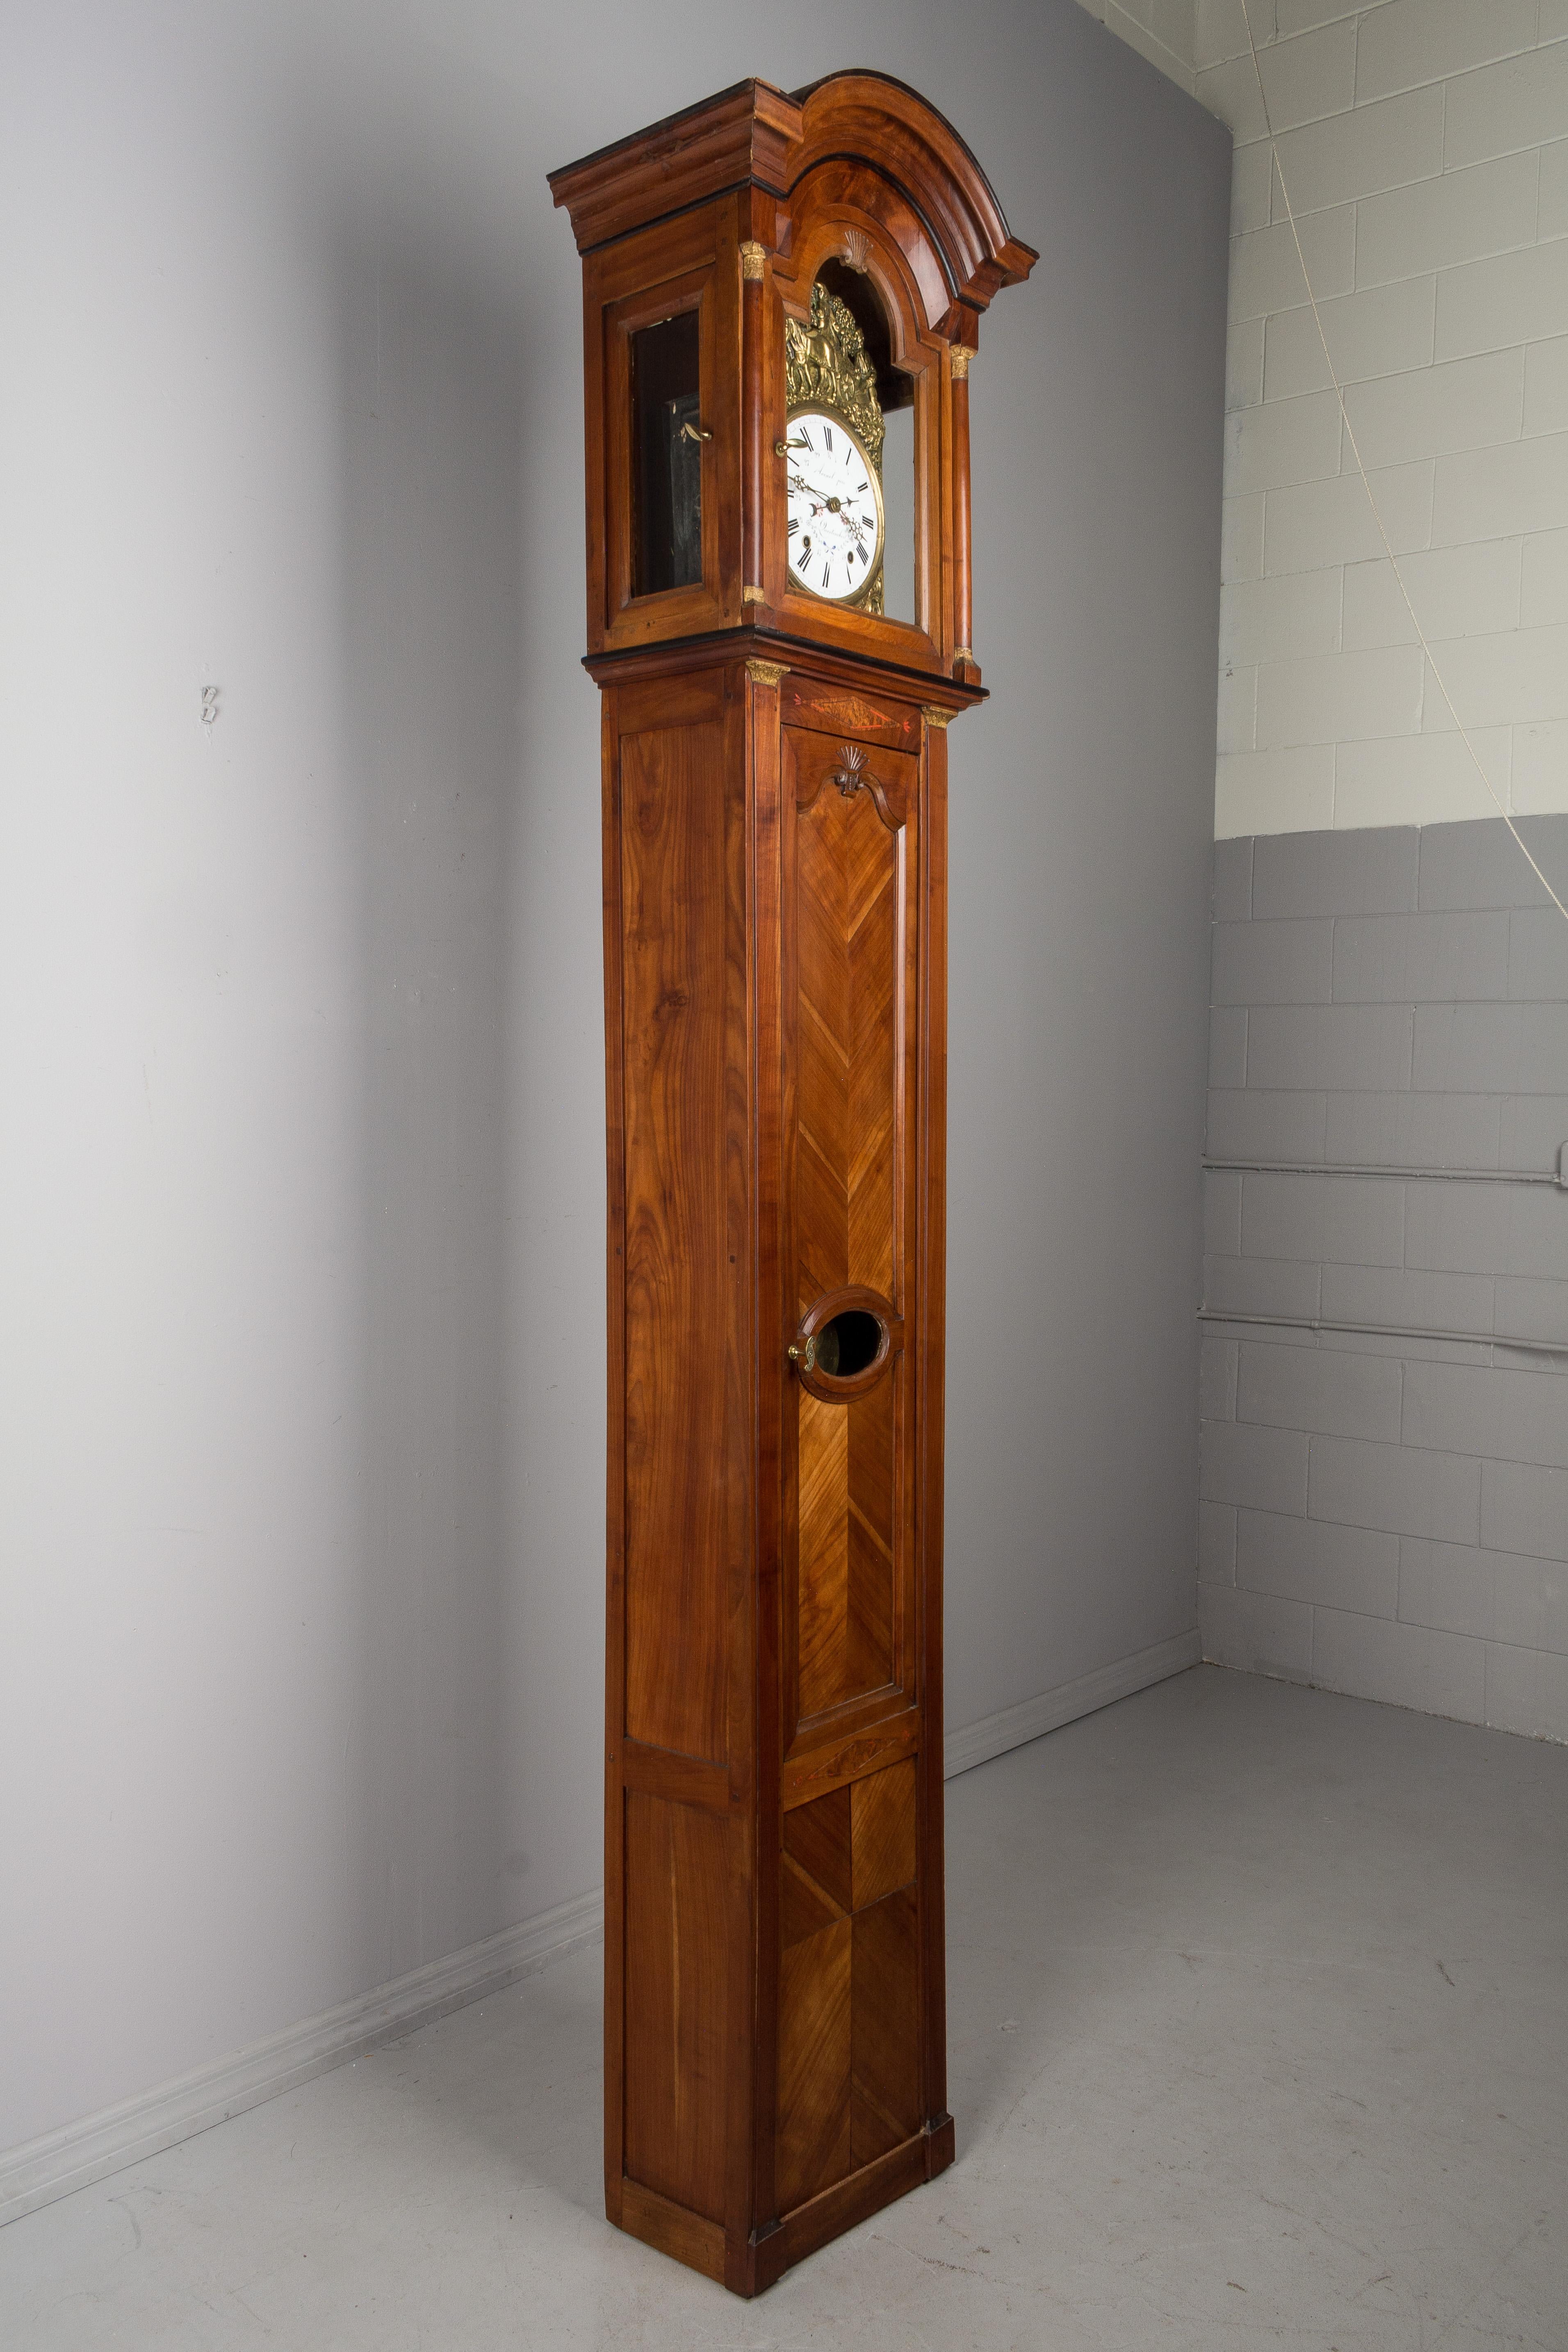 A 19th century French Horloge de Parquet or tall case clock from Brittany. Elegant solid cherry case in two parts, with book matched panels and a chapeau de gendarme crown. Subtle details including marquetry inlay and carved shell motif. Embossed